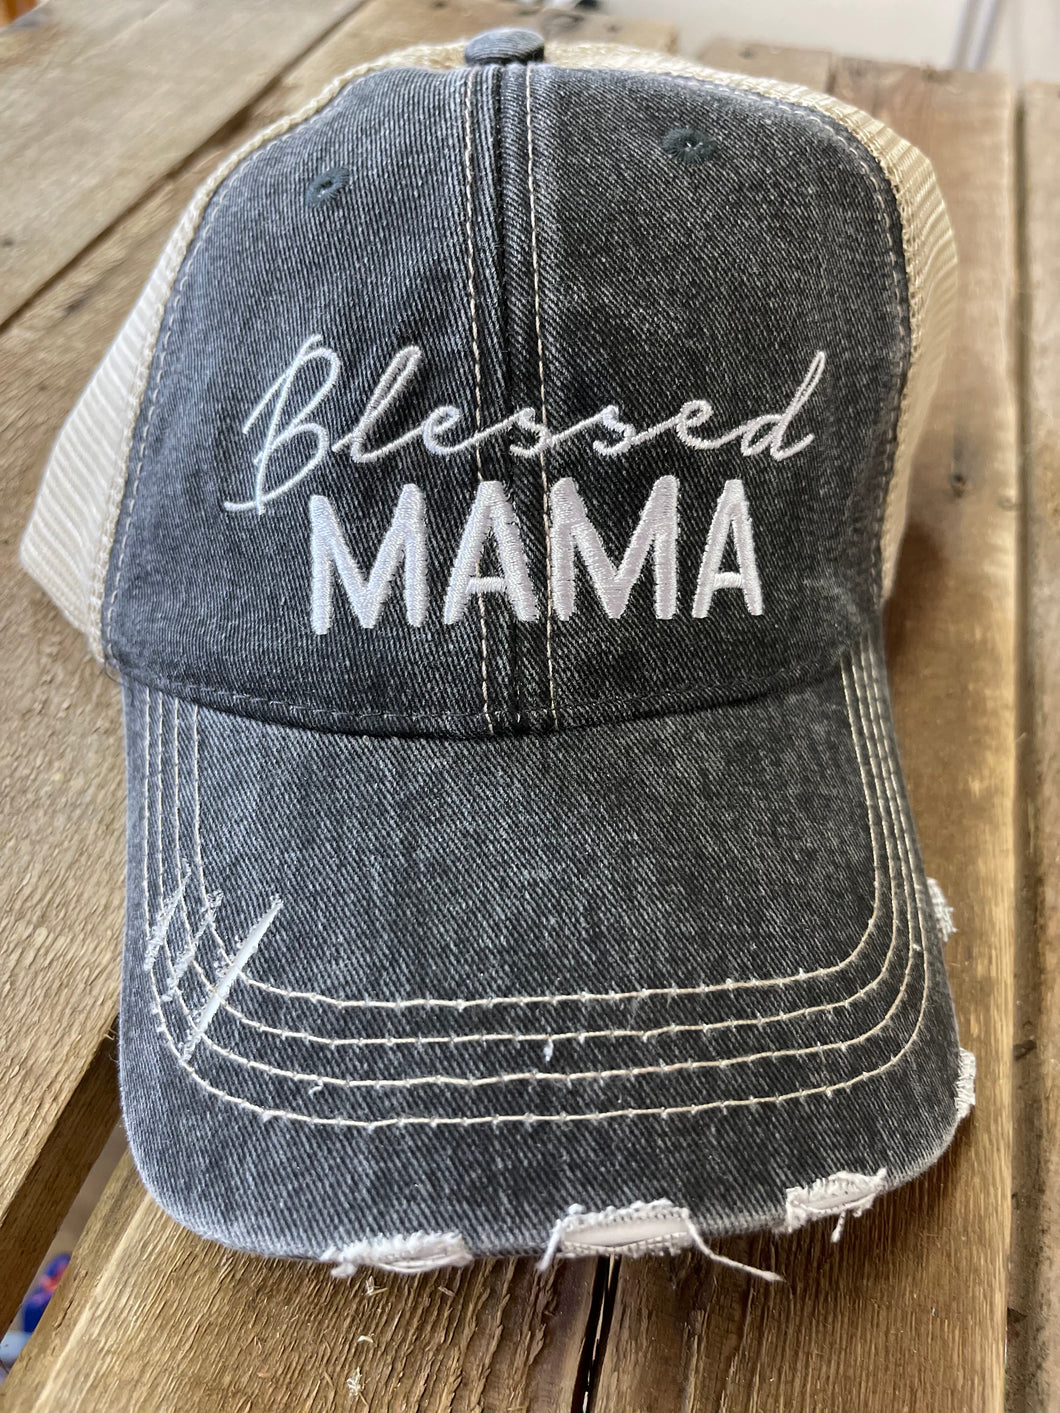 Blessed Mama Hat